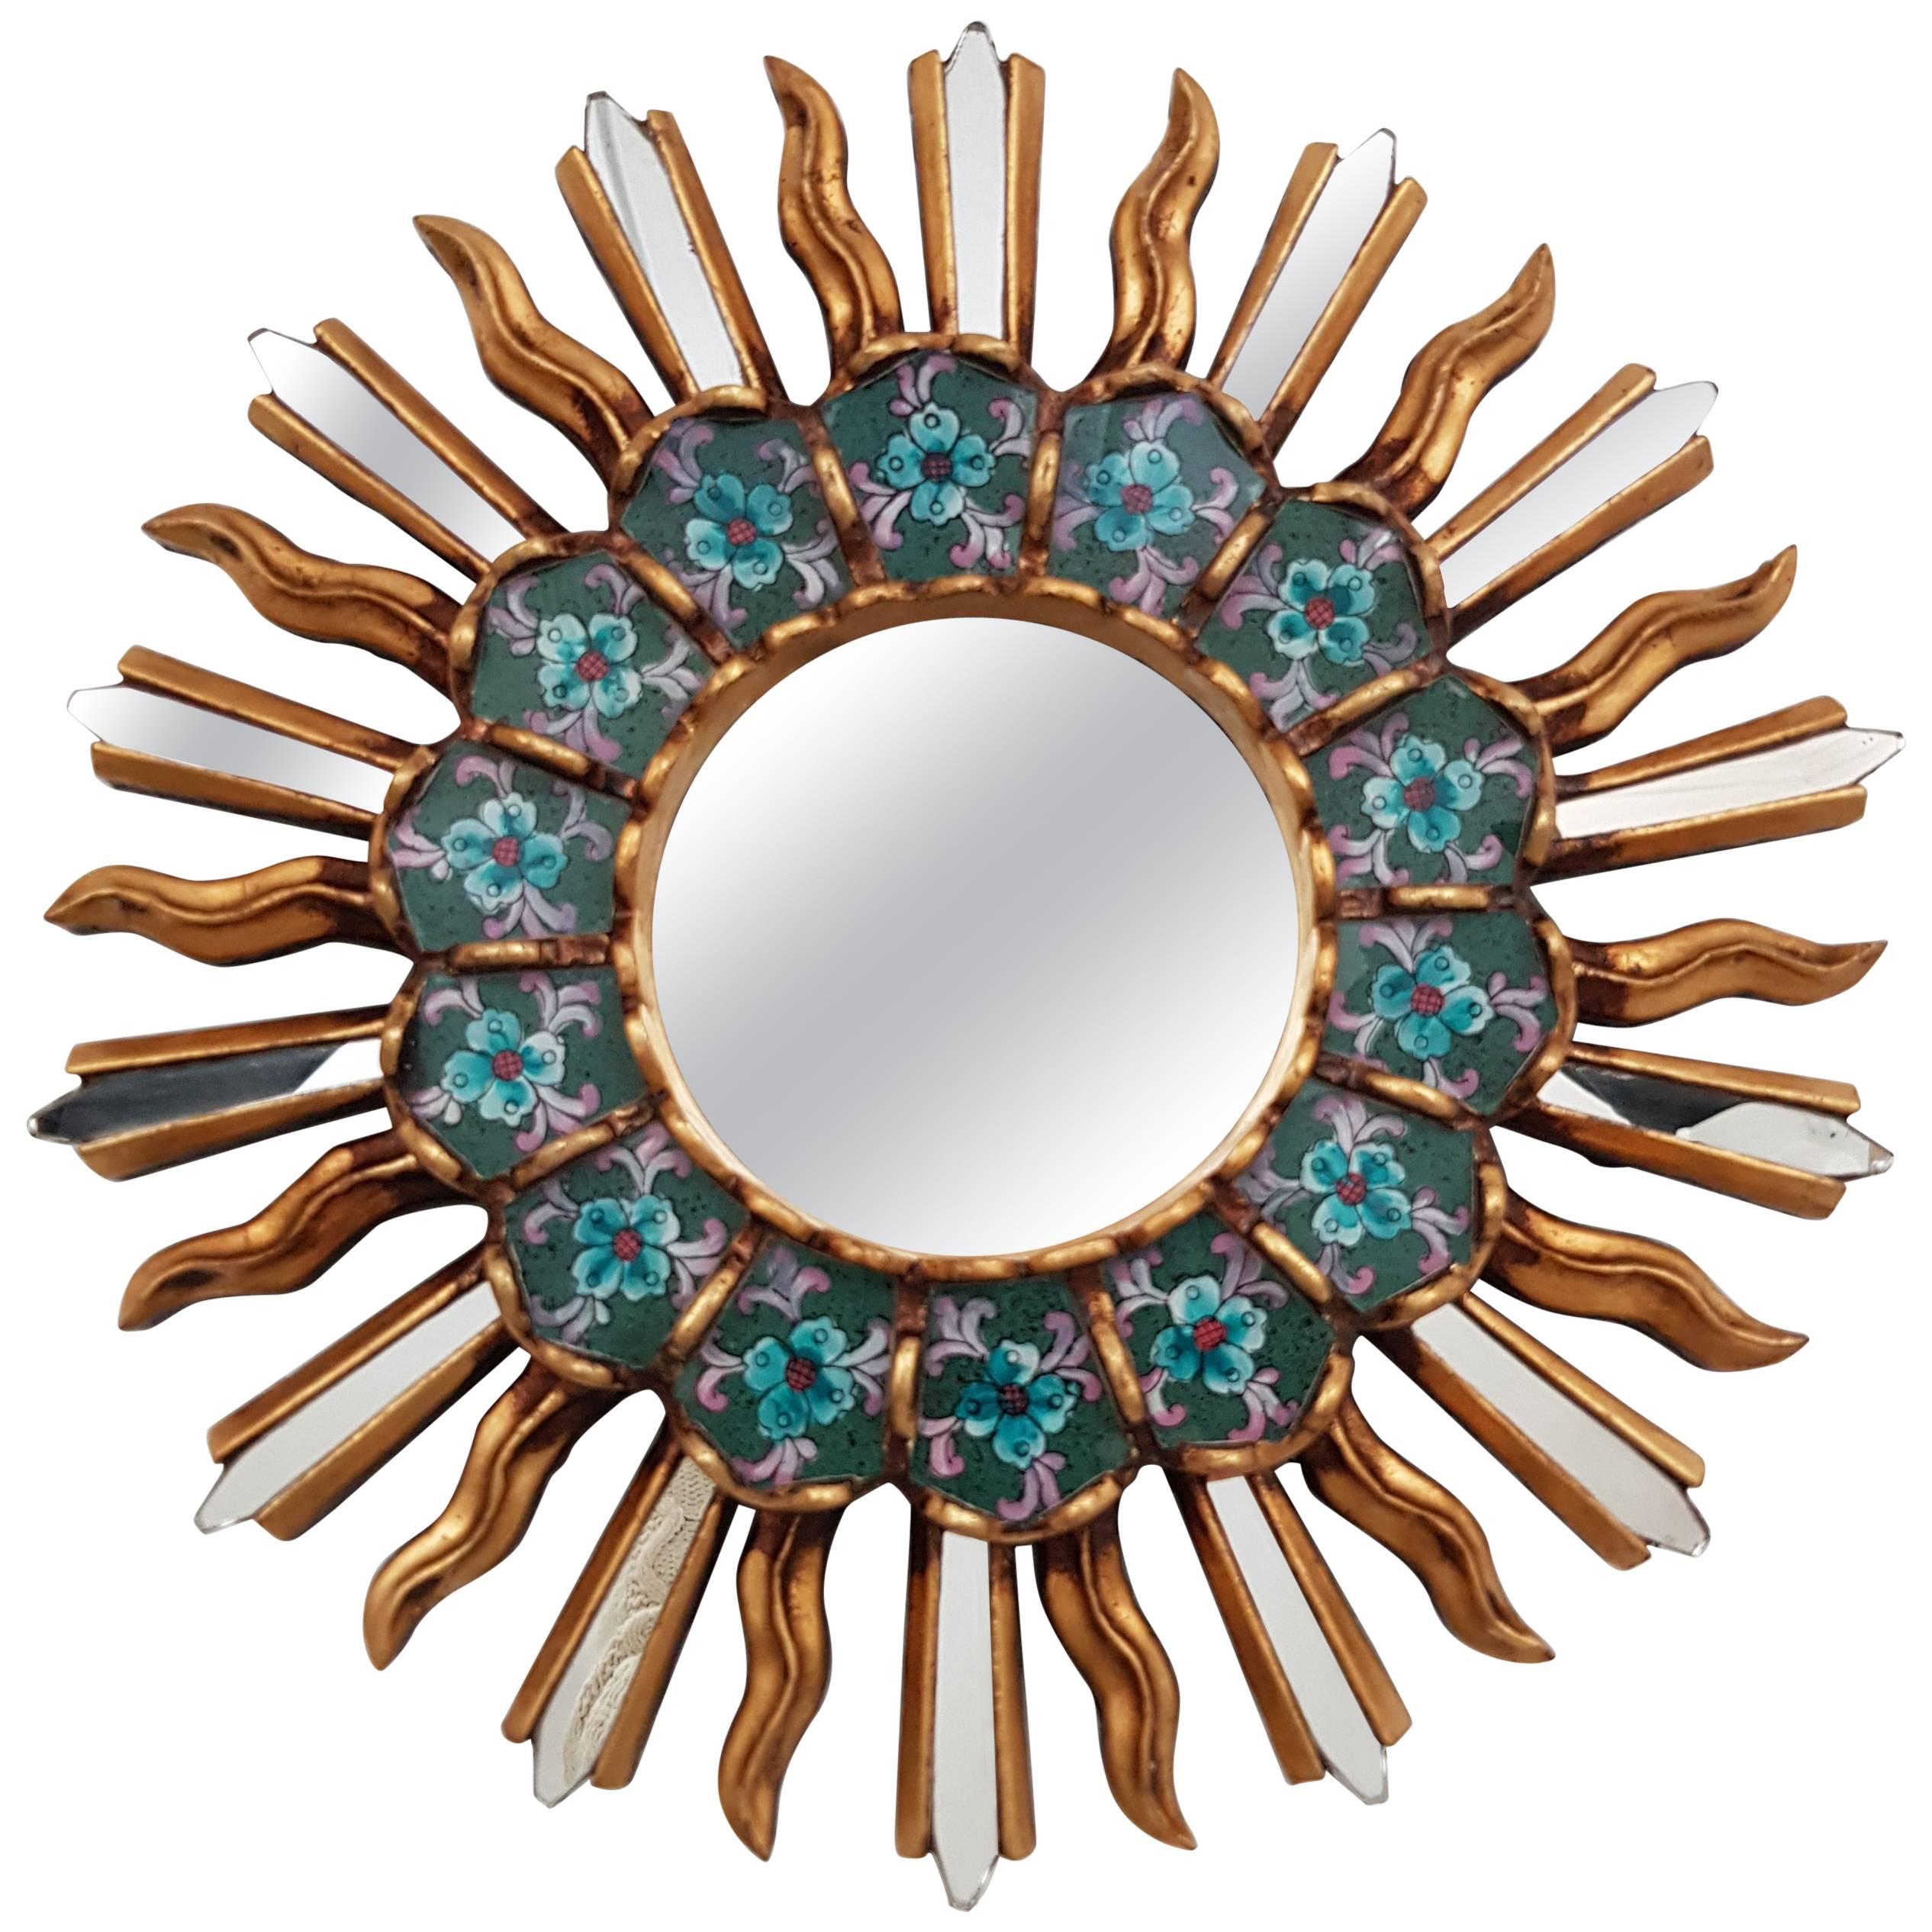 1970s Spanish Colonial Style Giltwood Mini Sunburst Mirror with Painted Glasses